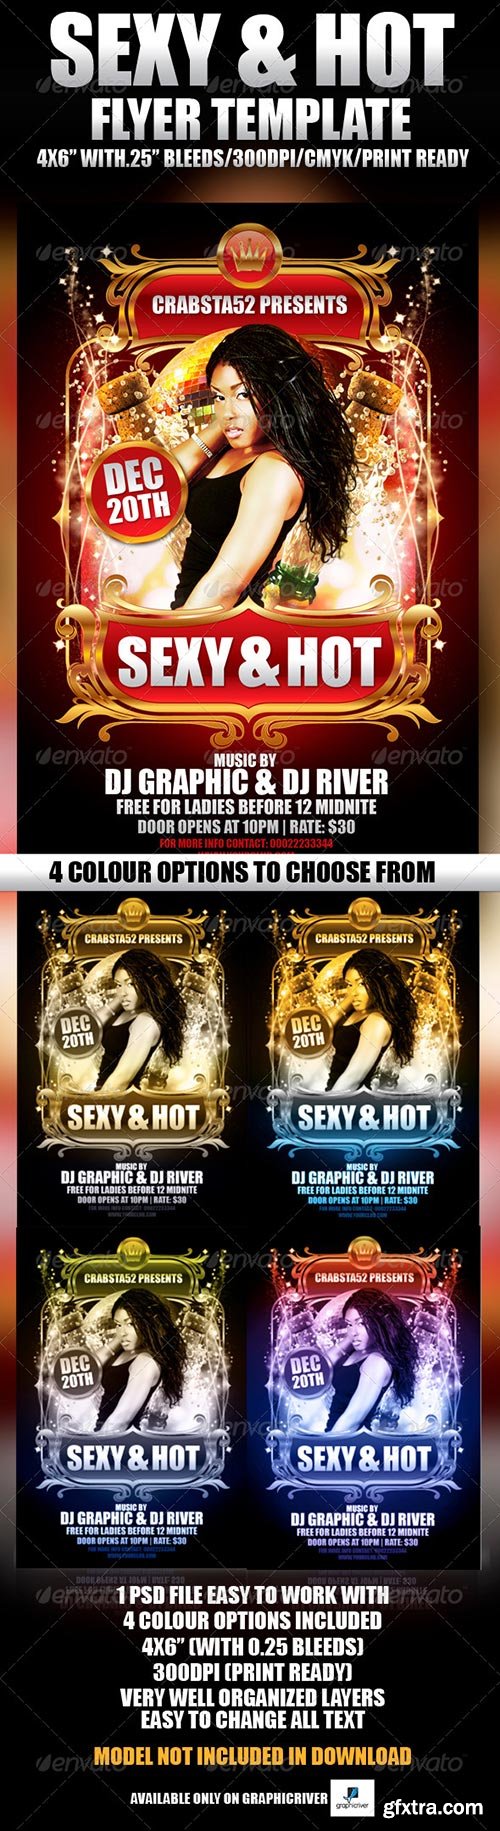 GraphicRiver - Sexy & Hot Flyer Template